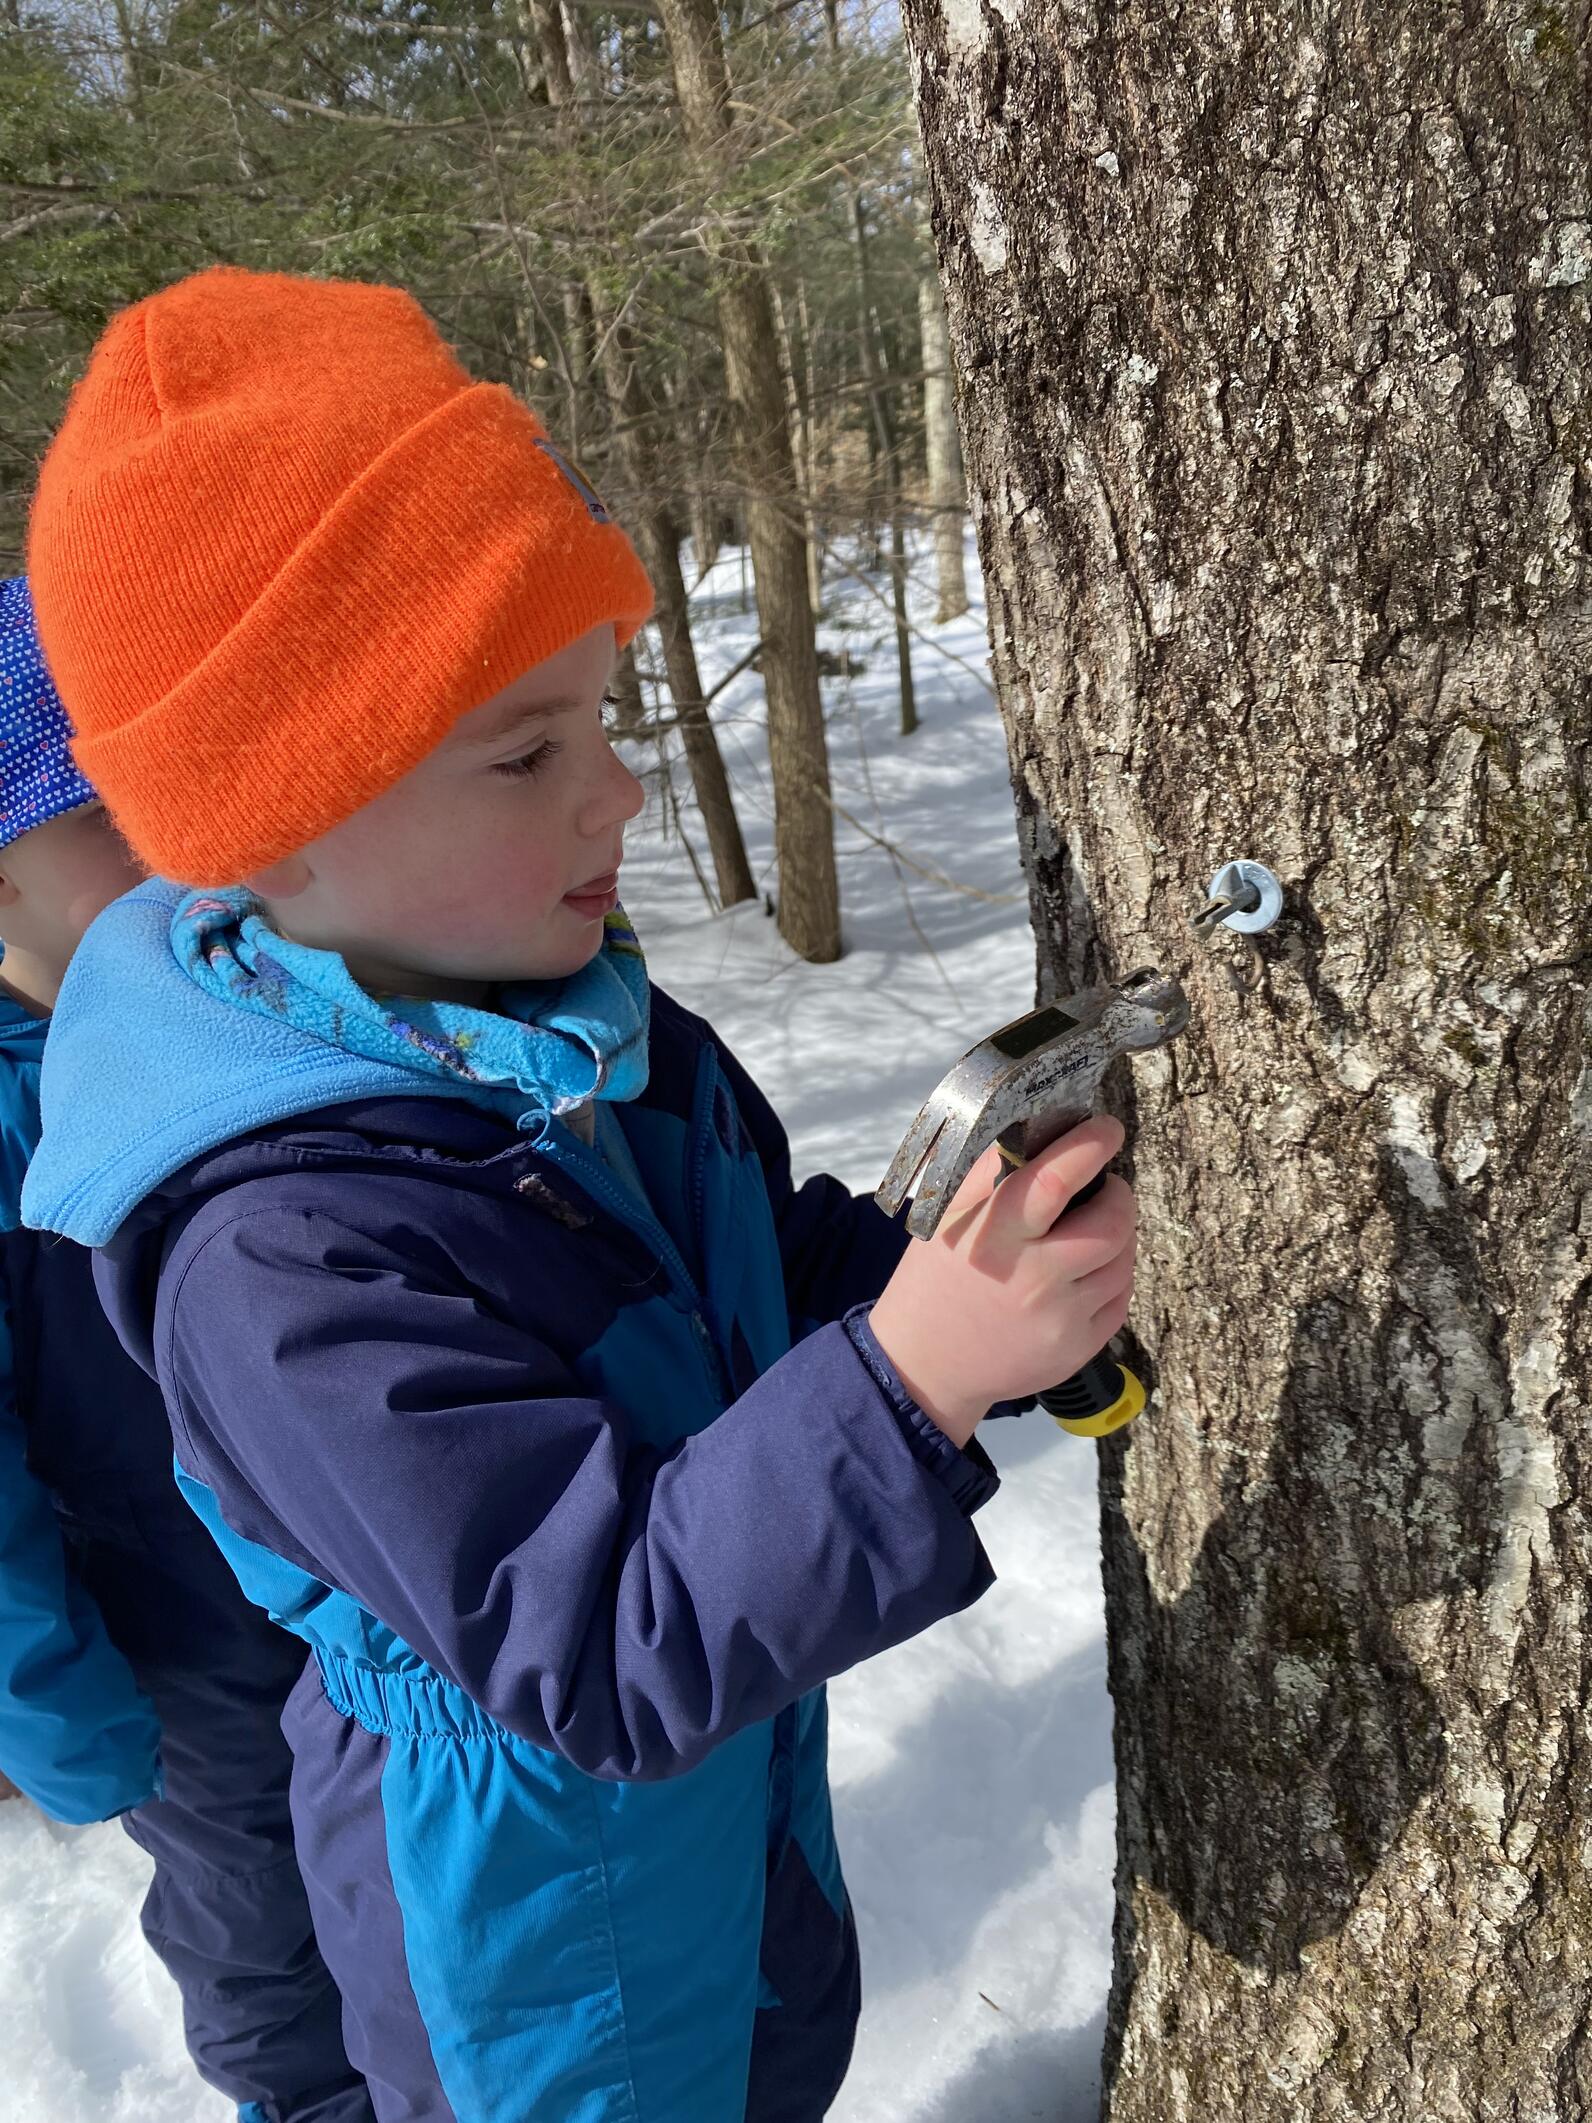 a child hammers a tap into a tree